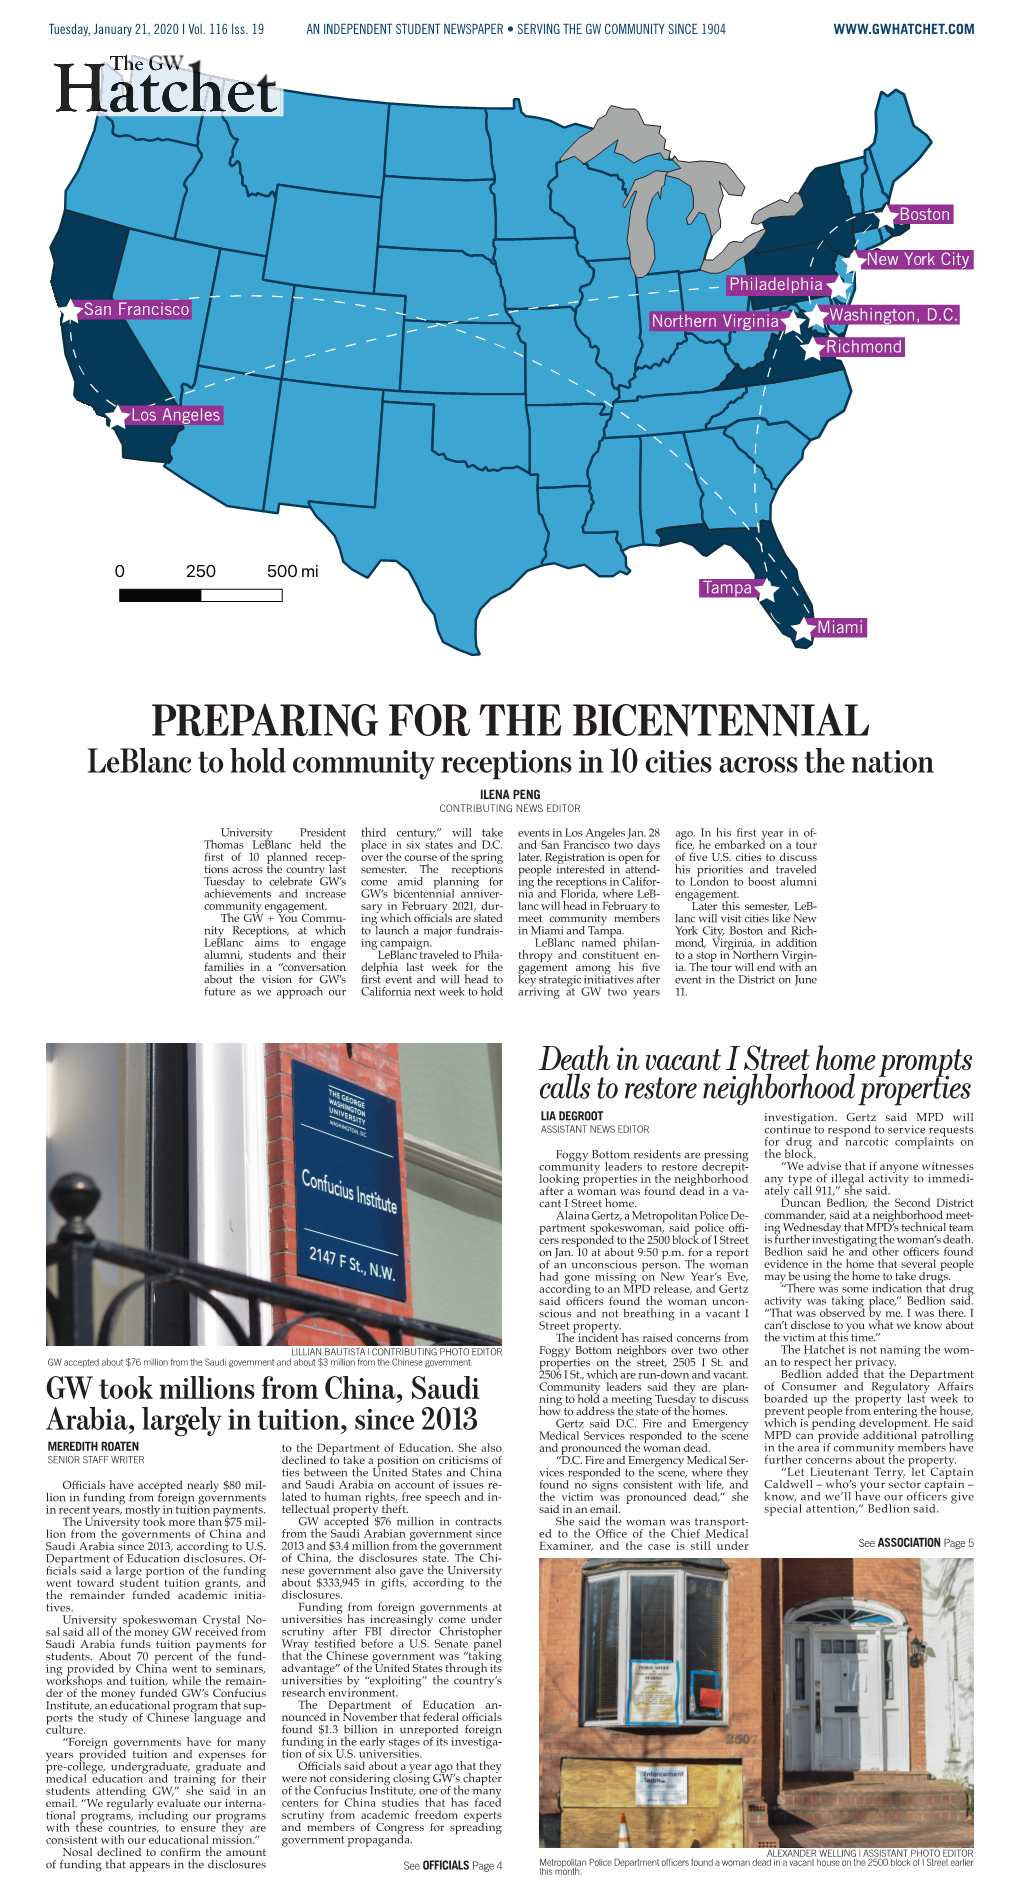 PREPARING for the BICENTENNIAL Leblanc to Hold Community Receptions in 10 Cities Across the Nation ILENA PENG CONTRIBUTING NEWS EDITOR